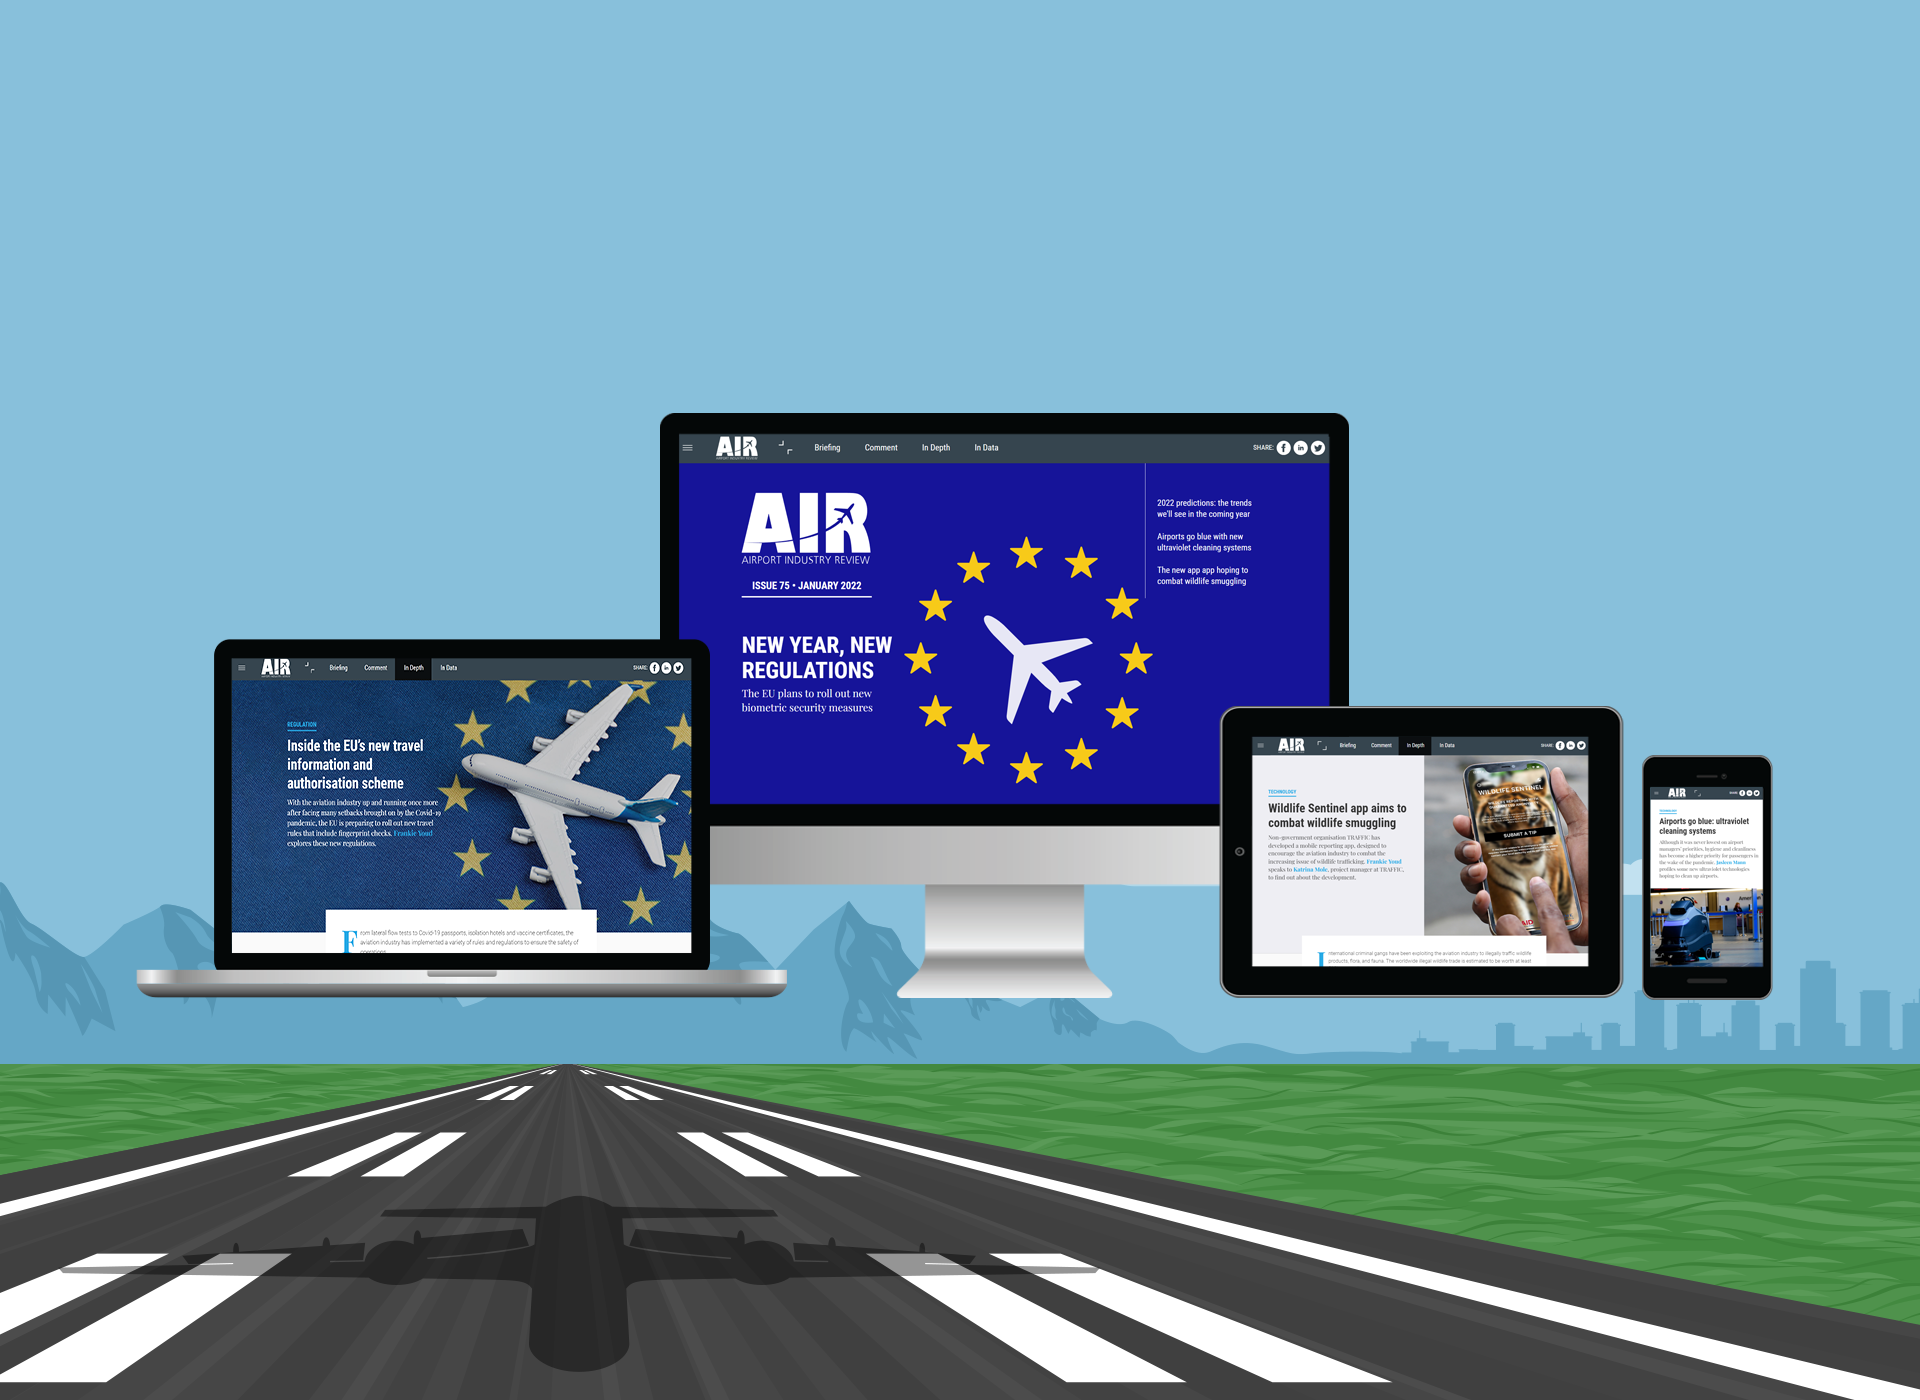 New year, new regulations: AIR 75 out now!